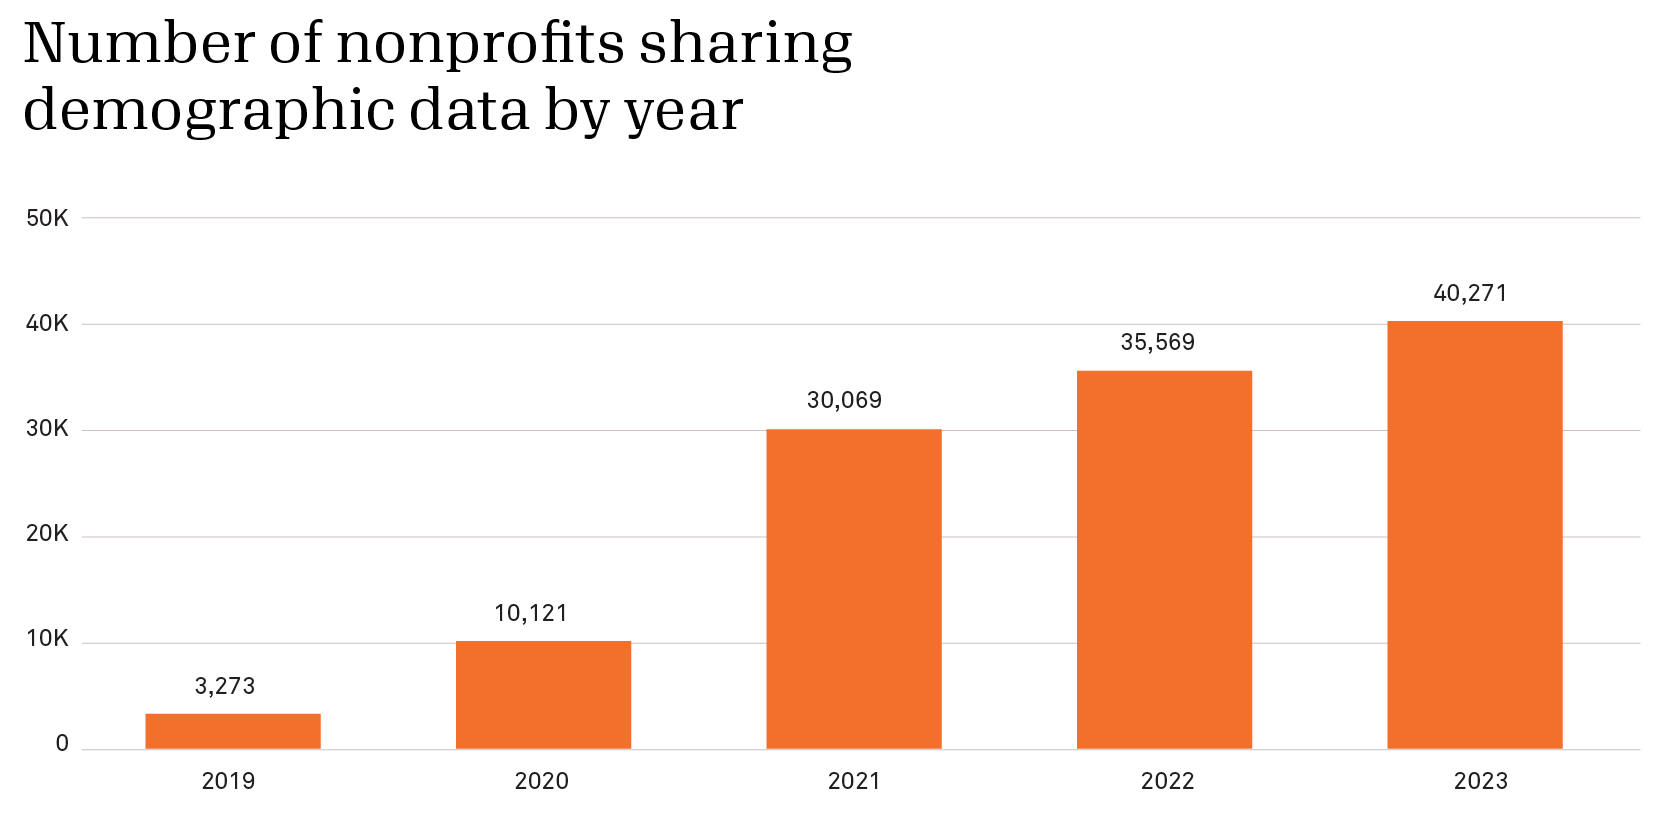 Bar graph with number of nonprofits sharing demographic data by year. 3,273 in 2019; 10,121 in 2020; 30,069 in 2021; 35,569 in 2022; 40,271 in 2023.